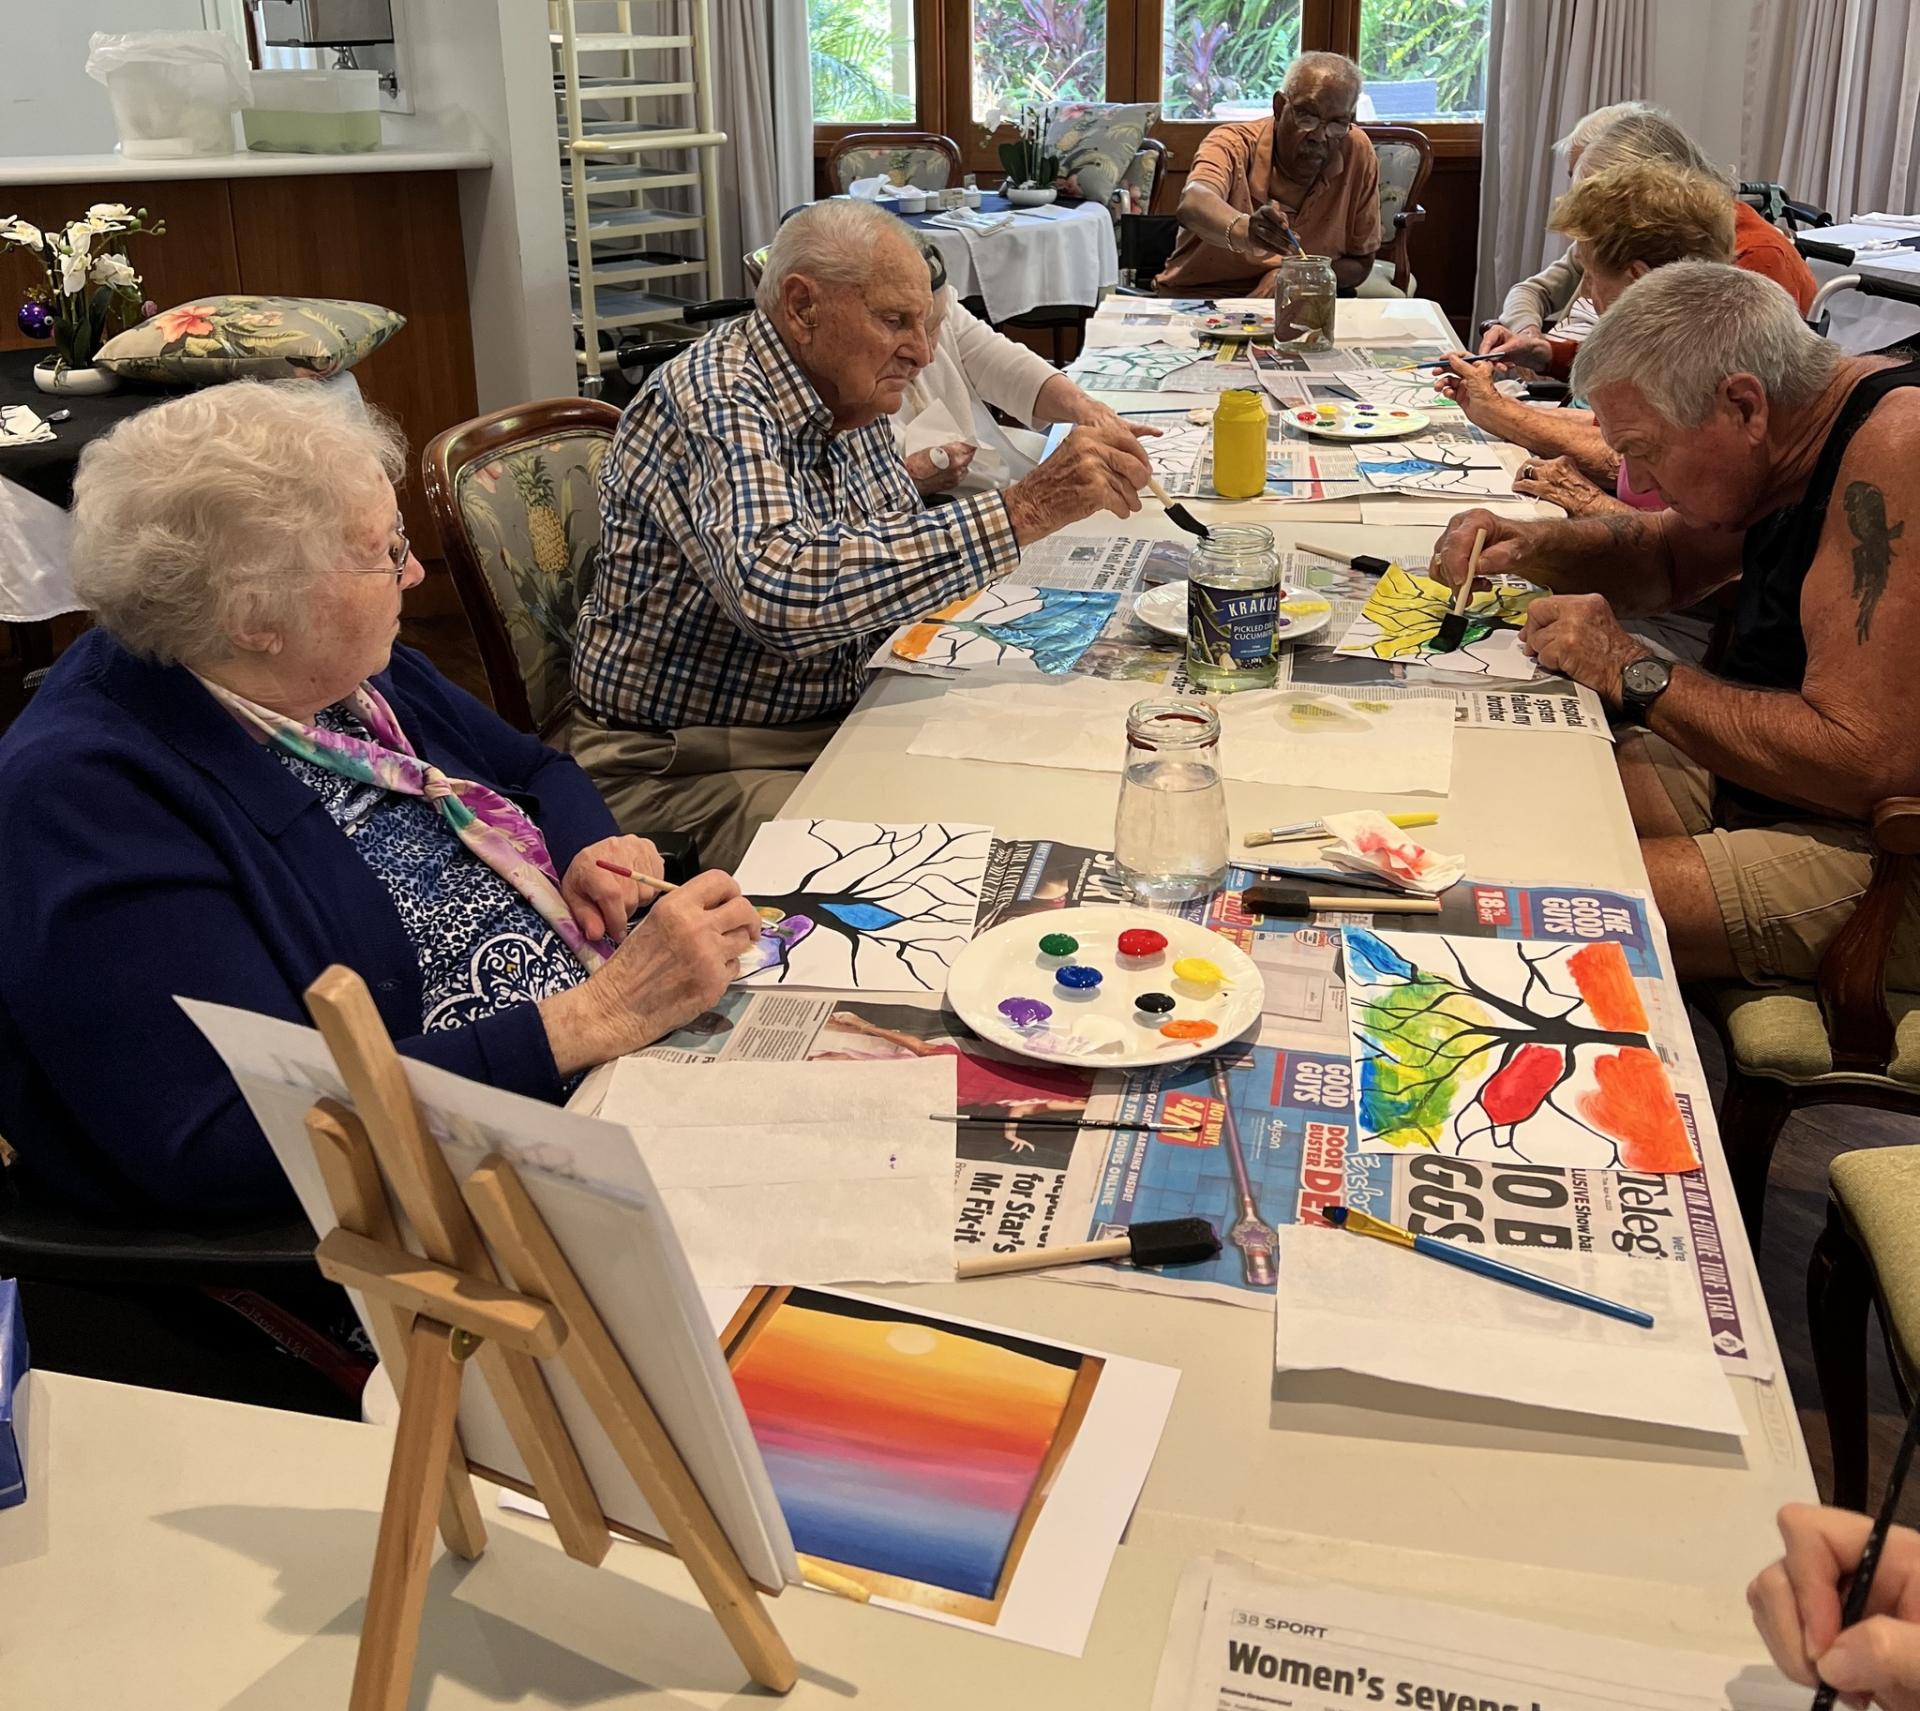 Creativity in aged care homes Gold Coast